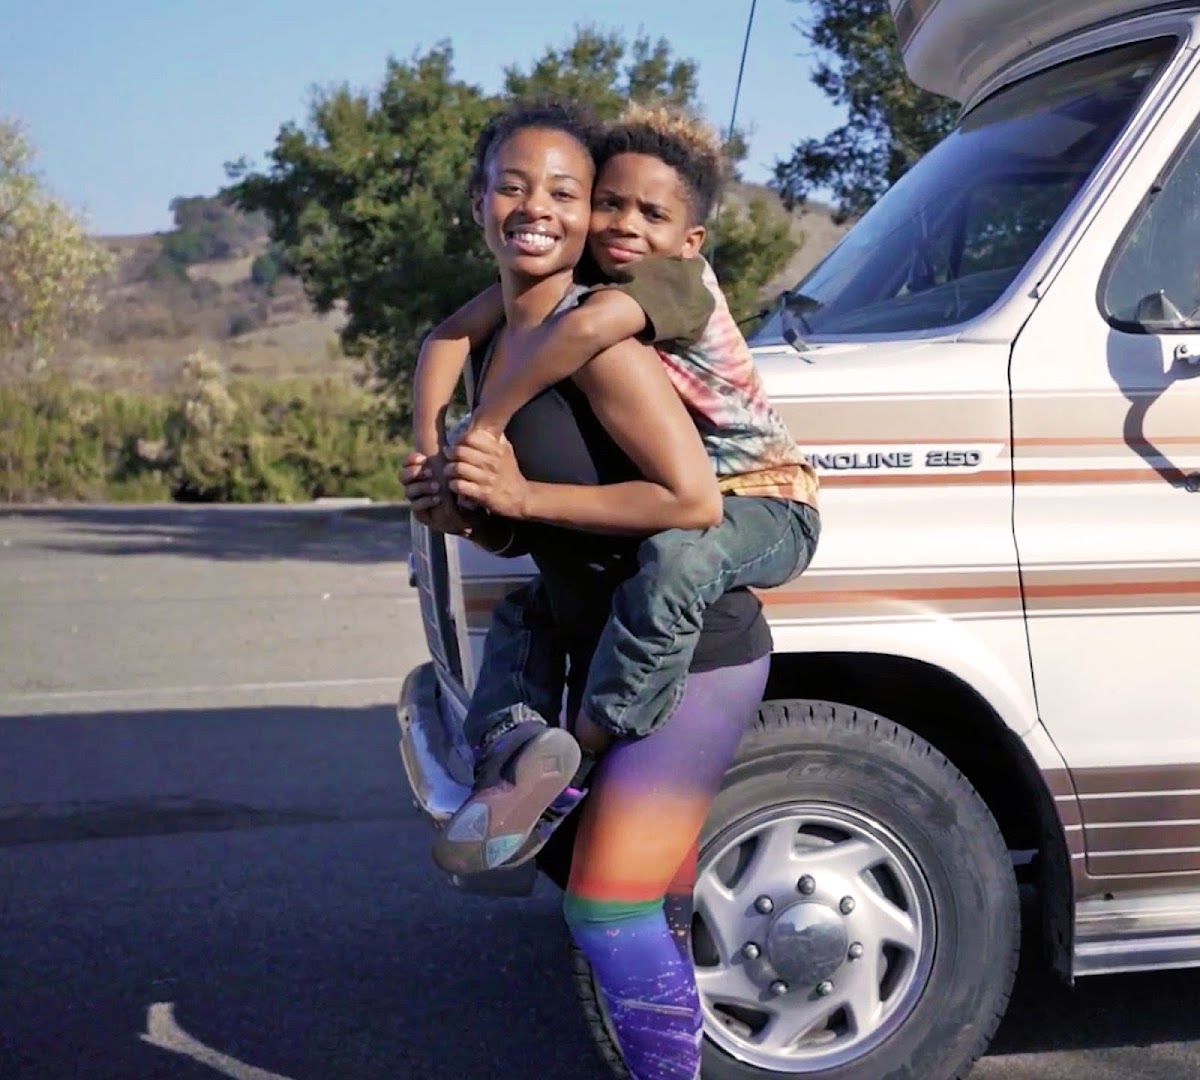 A young woman smiles at the camera while a boy ride piggyback on her. They're standing in front of the hood of a recreational vehicle parked on the side of a road.